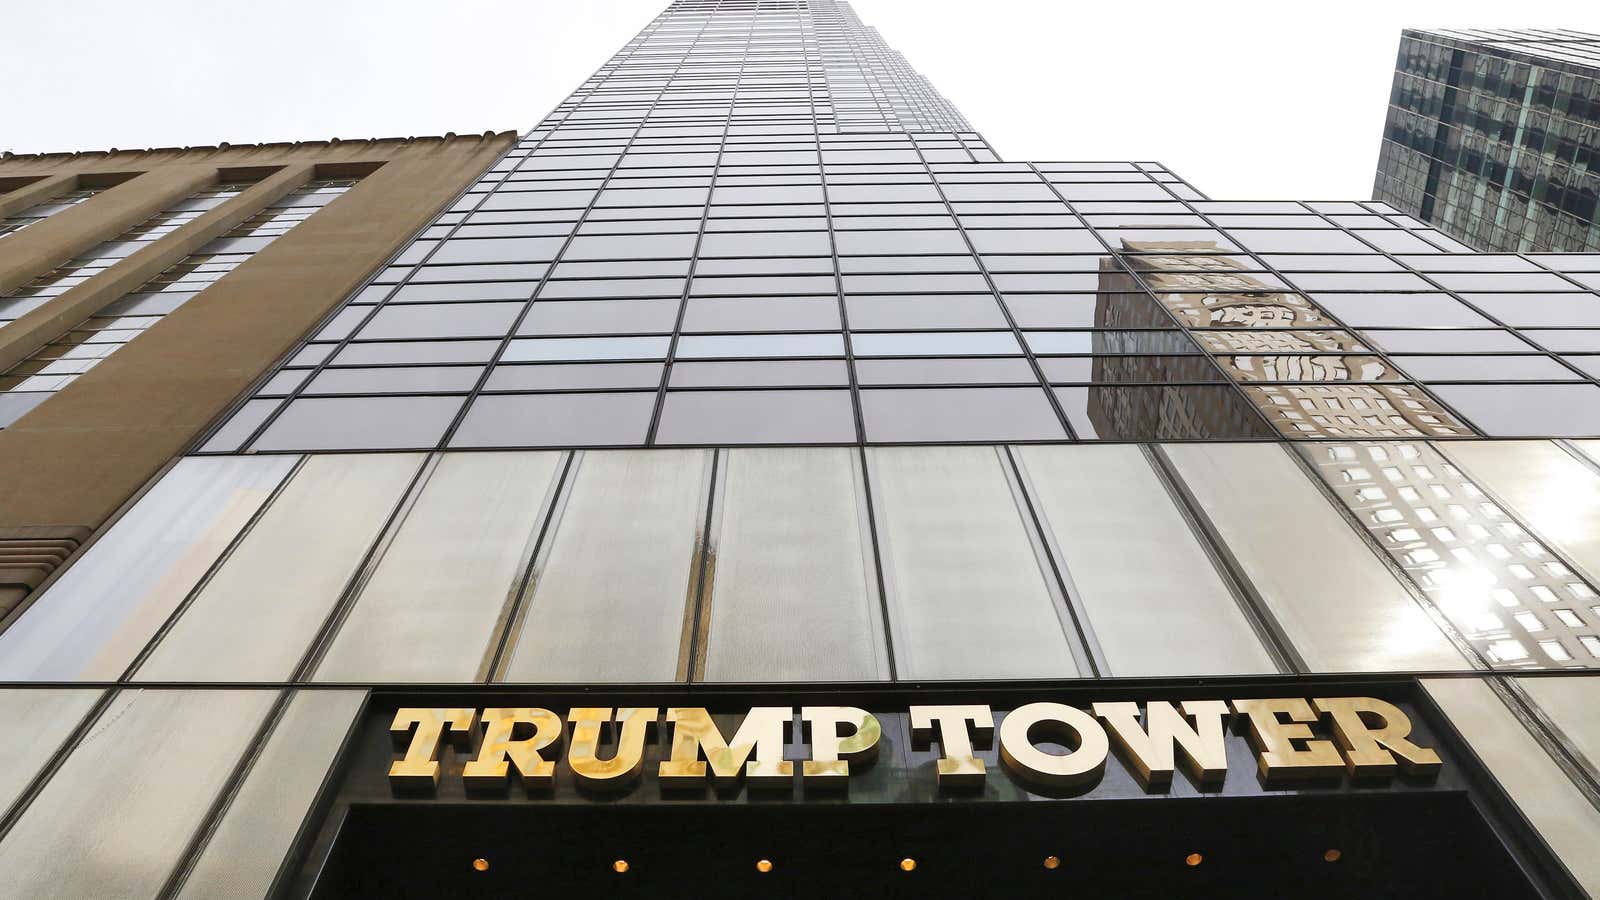 A tough year for Trump Tower.